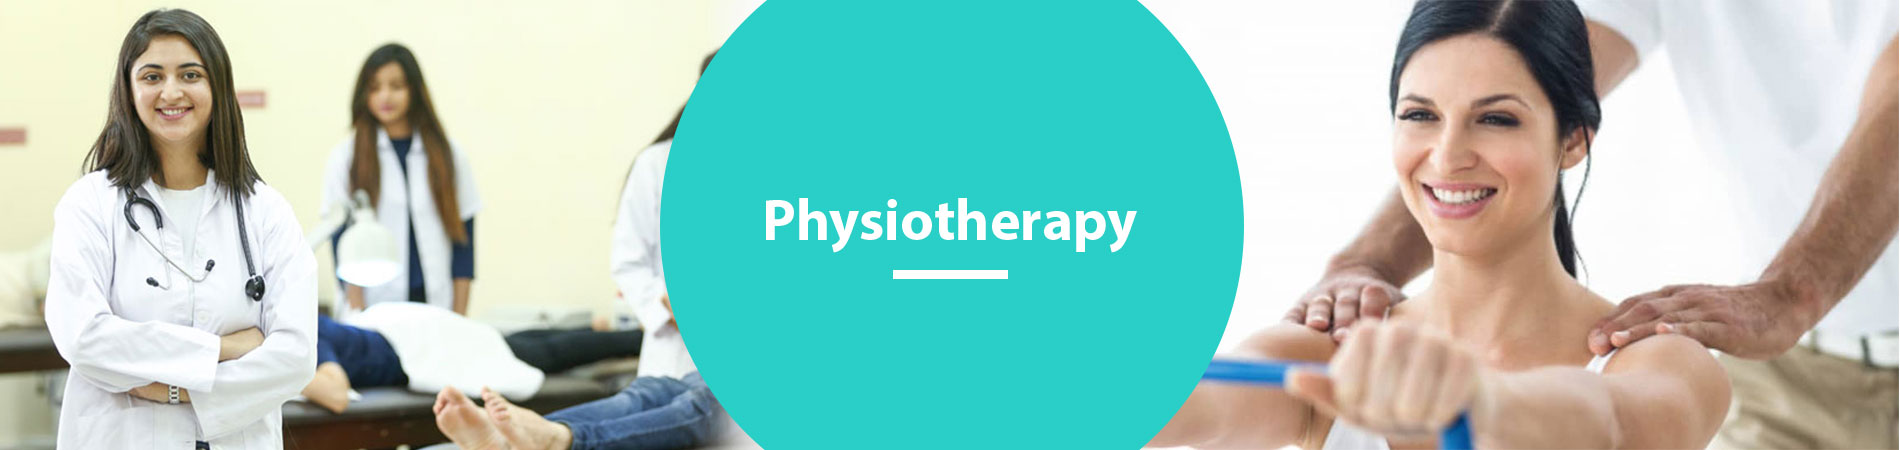 SV banner Physiotherapy